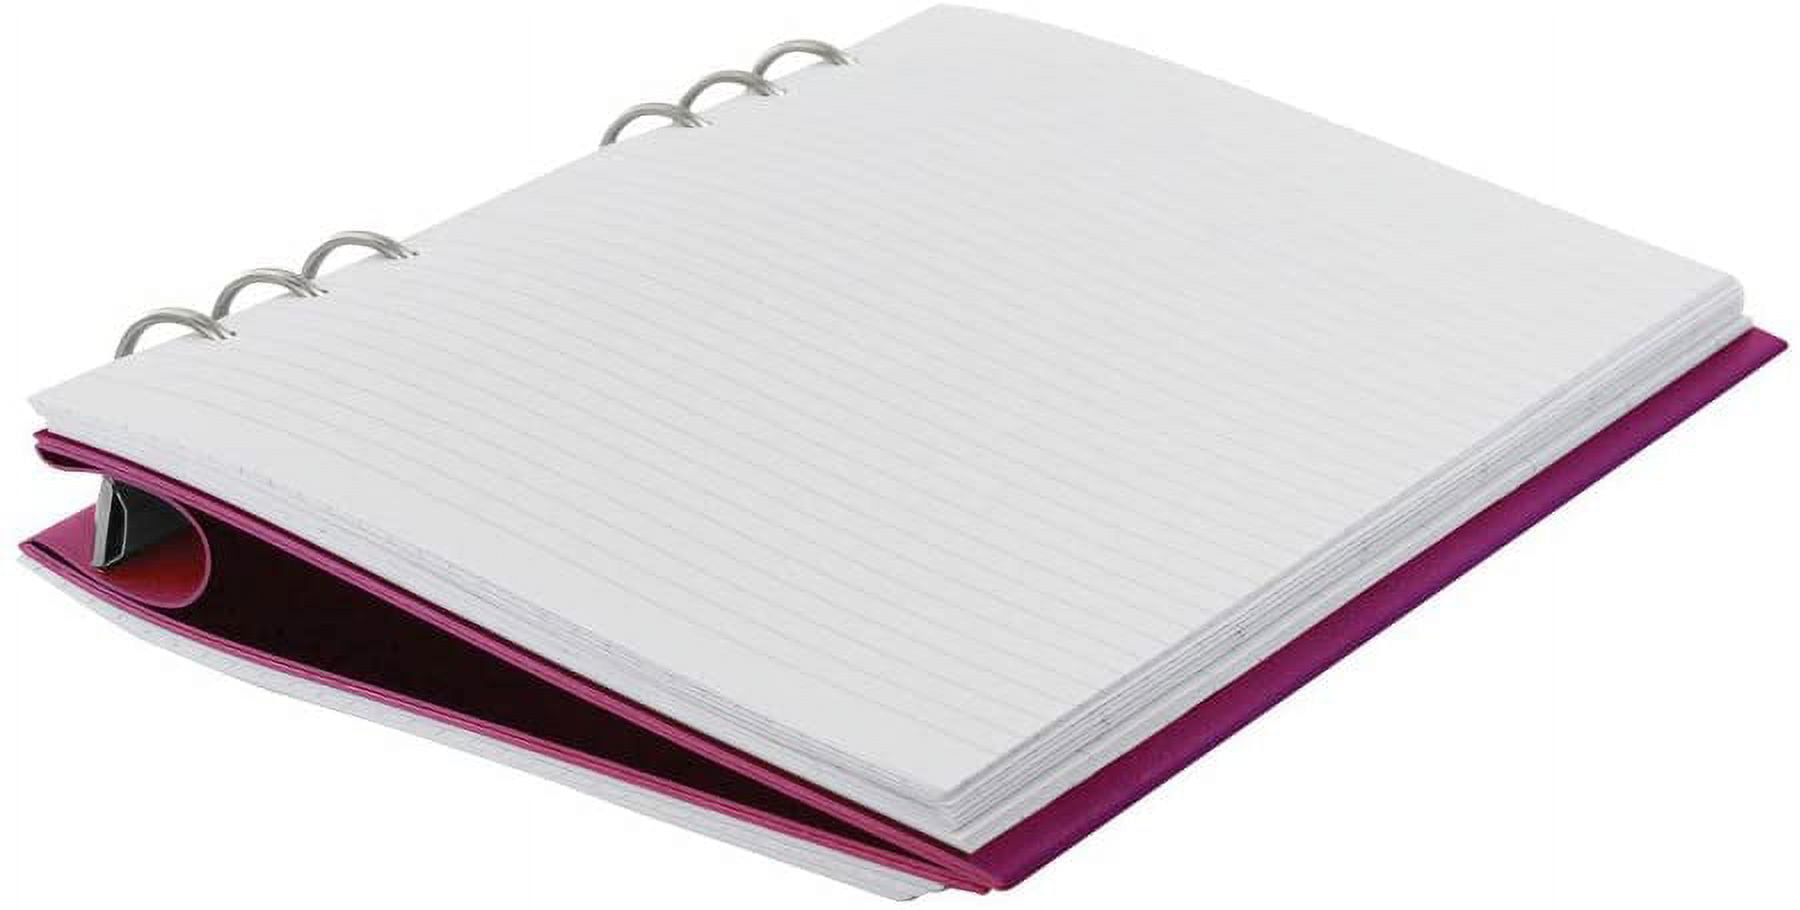 Filofax Clipbook, Refillable Patterns Notebook, Indigo Floral, A5 (8.25 x  5.75) Ruled, Plain and Quadrille Notes Pages, Undated Planner, Yearly,  Monthly and Weekly Calendar (B023624) 